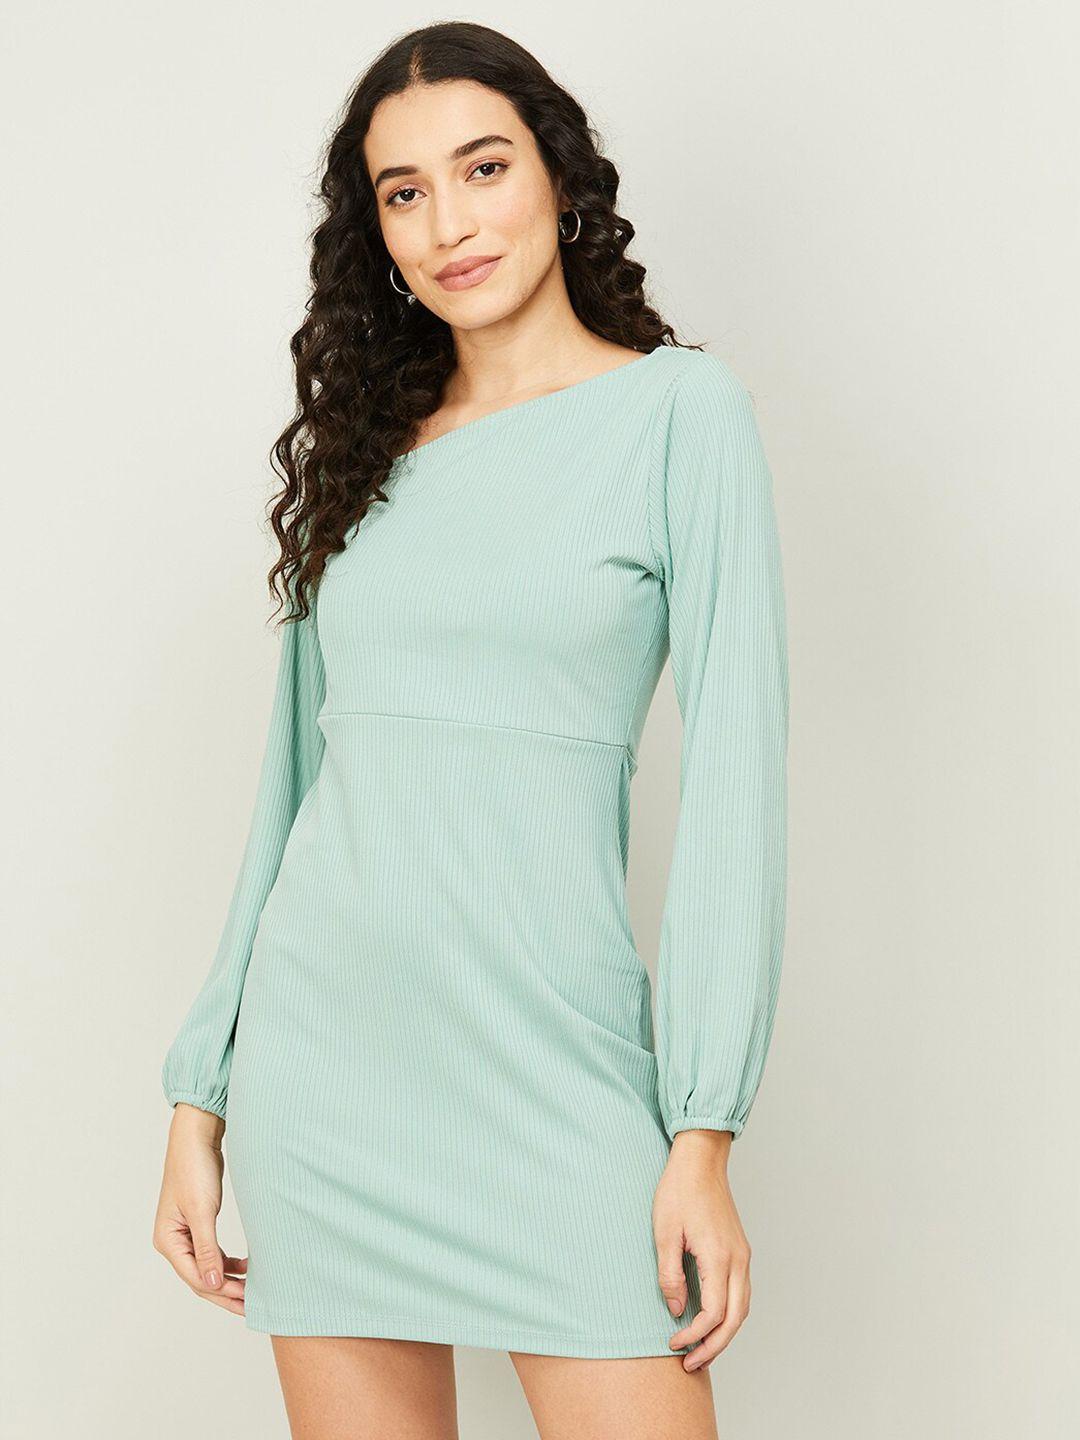 ginger by lifestyle green sheath dress